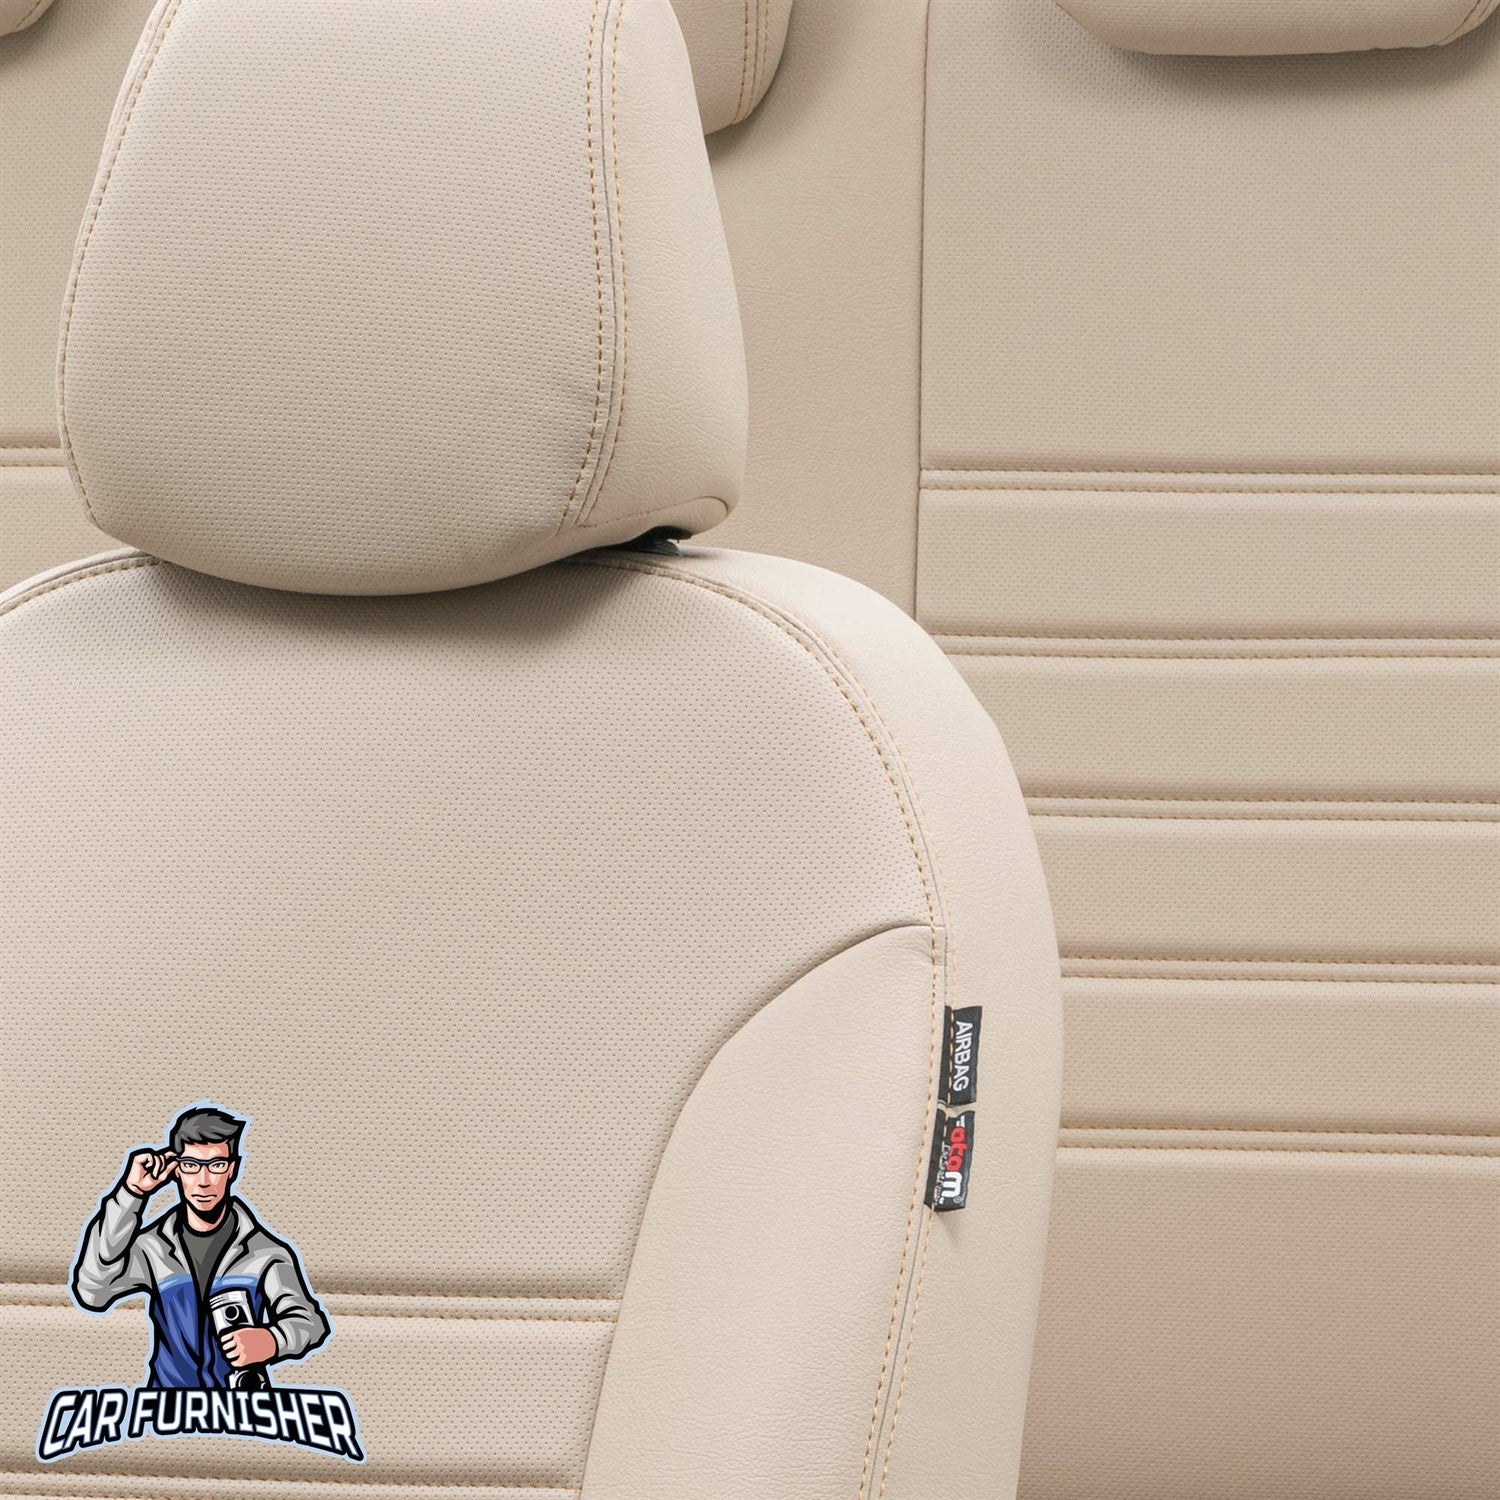 Mini Cooper Seat Covers Istanbul Leather Design Beige Leather